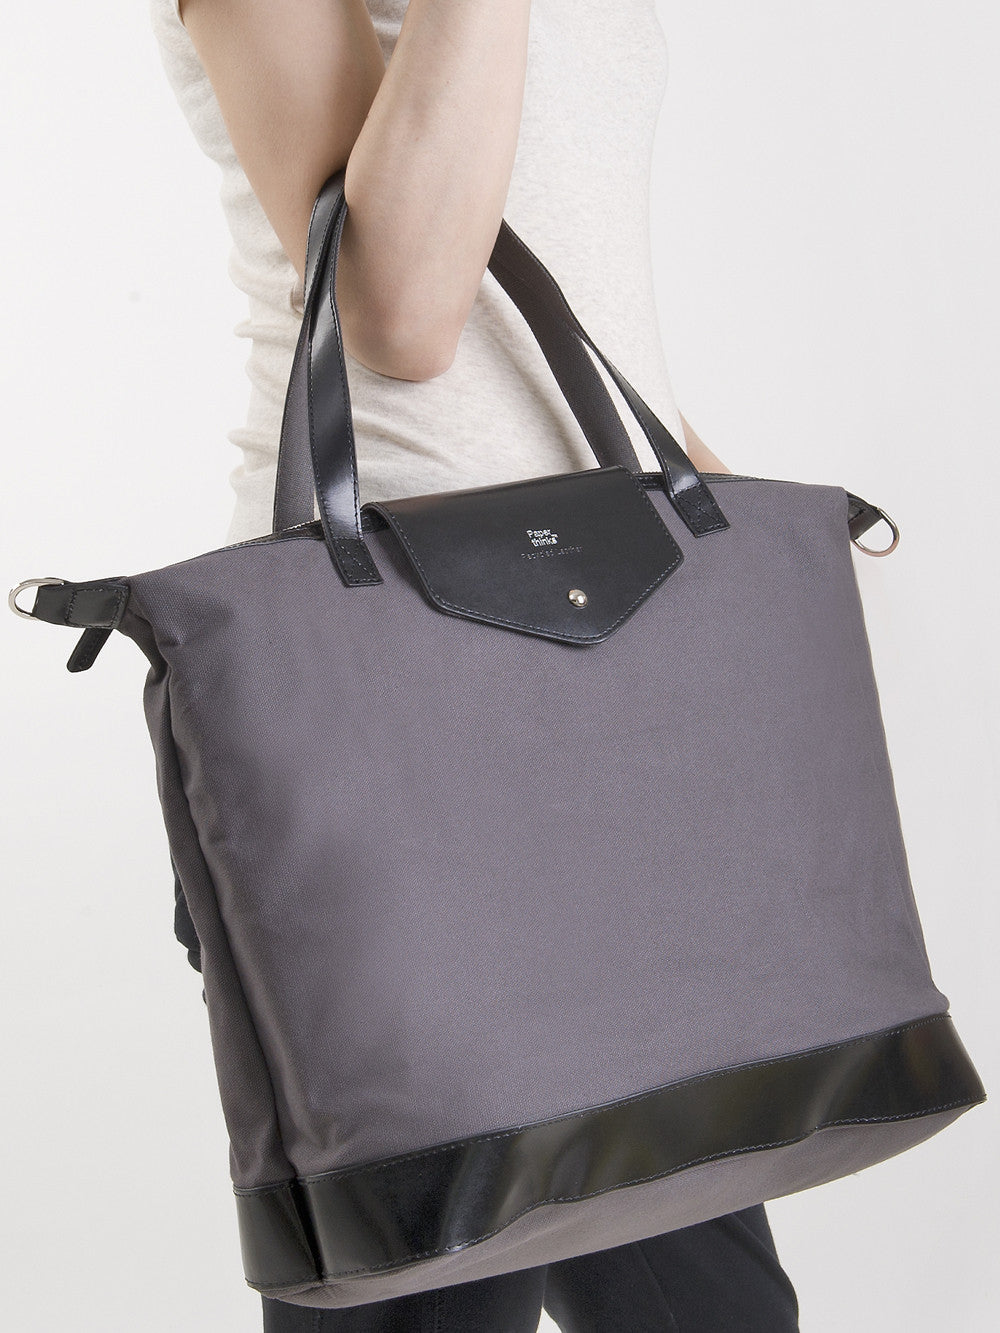 Paperthinks Canvas Zip Top Bag with Recycled Leather Accents - Charcoal - Paperthinks.us